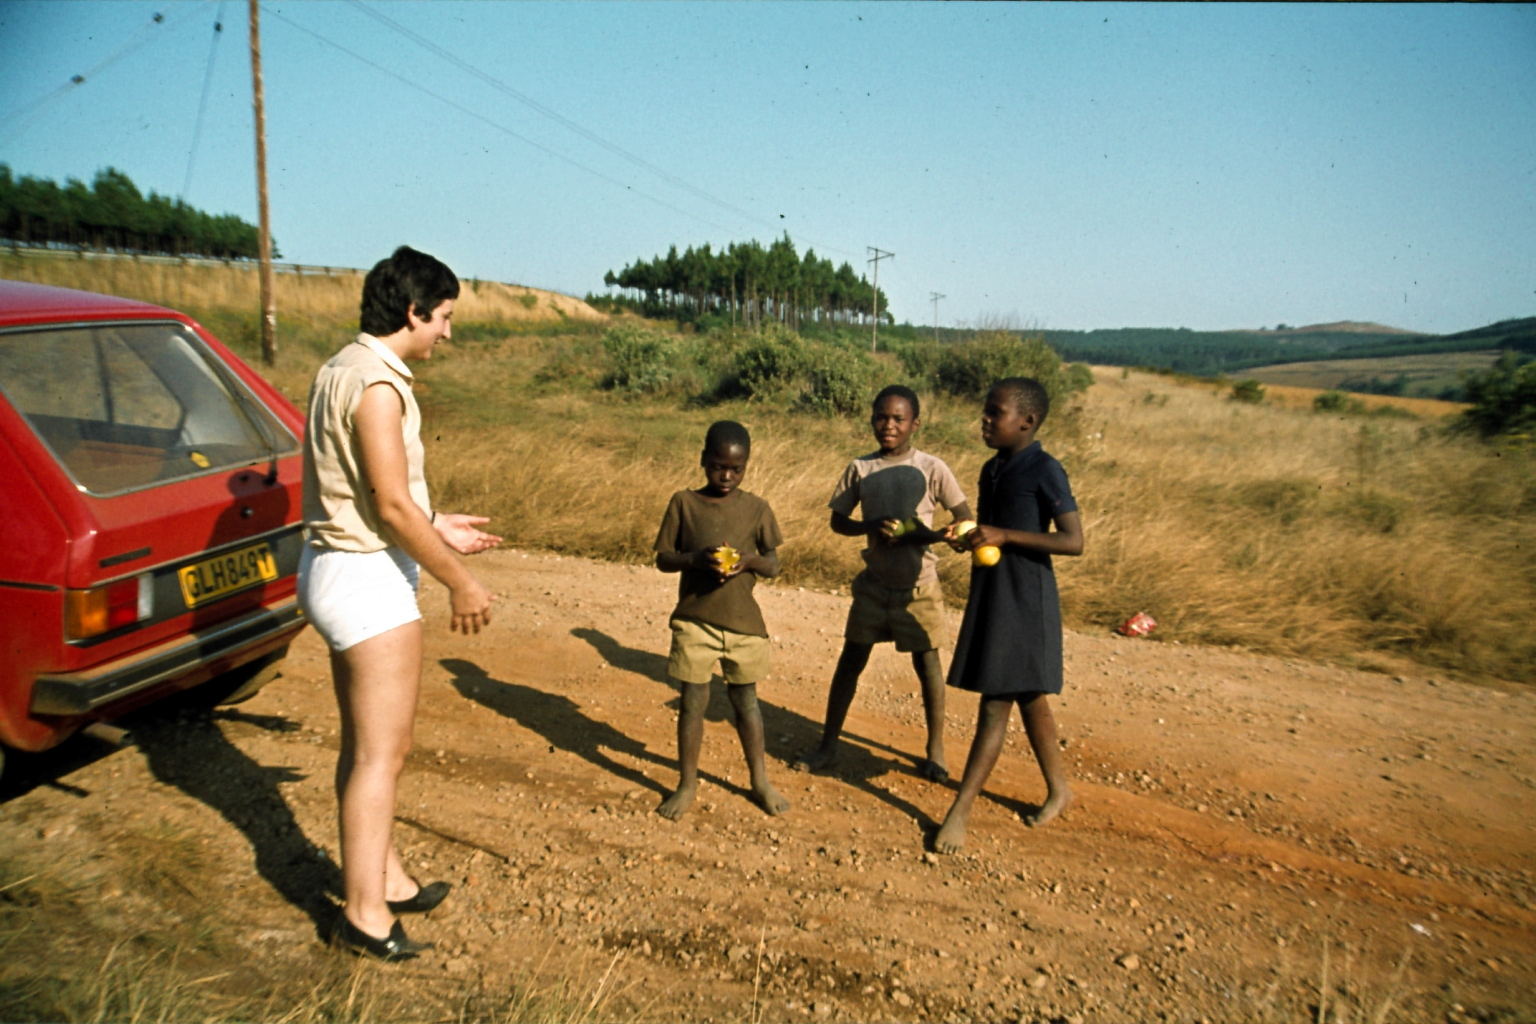 1982  Eastern Transvaal, South Africa